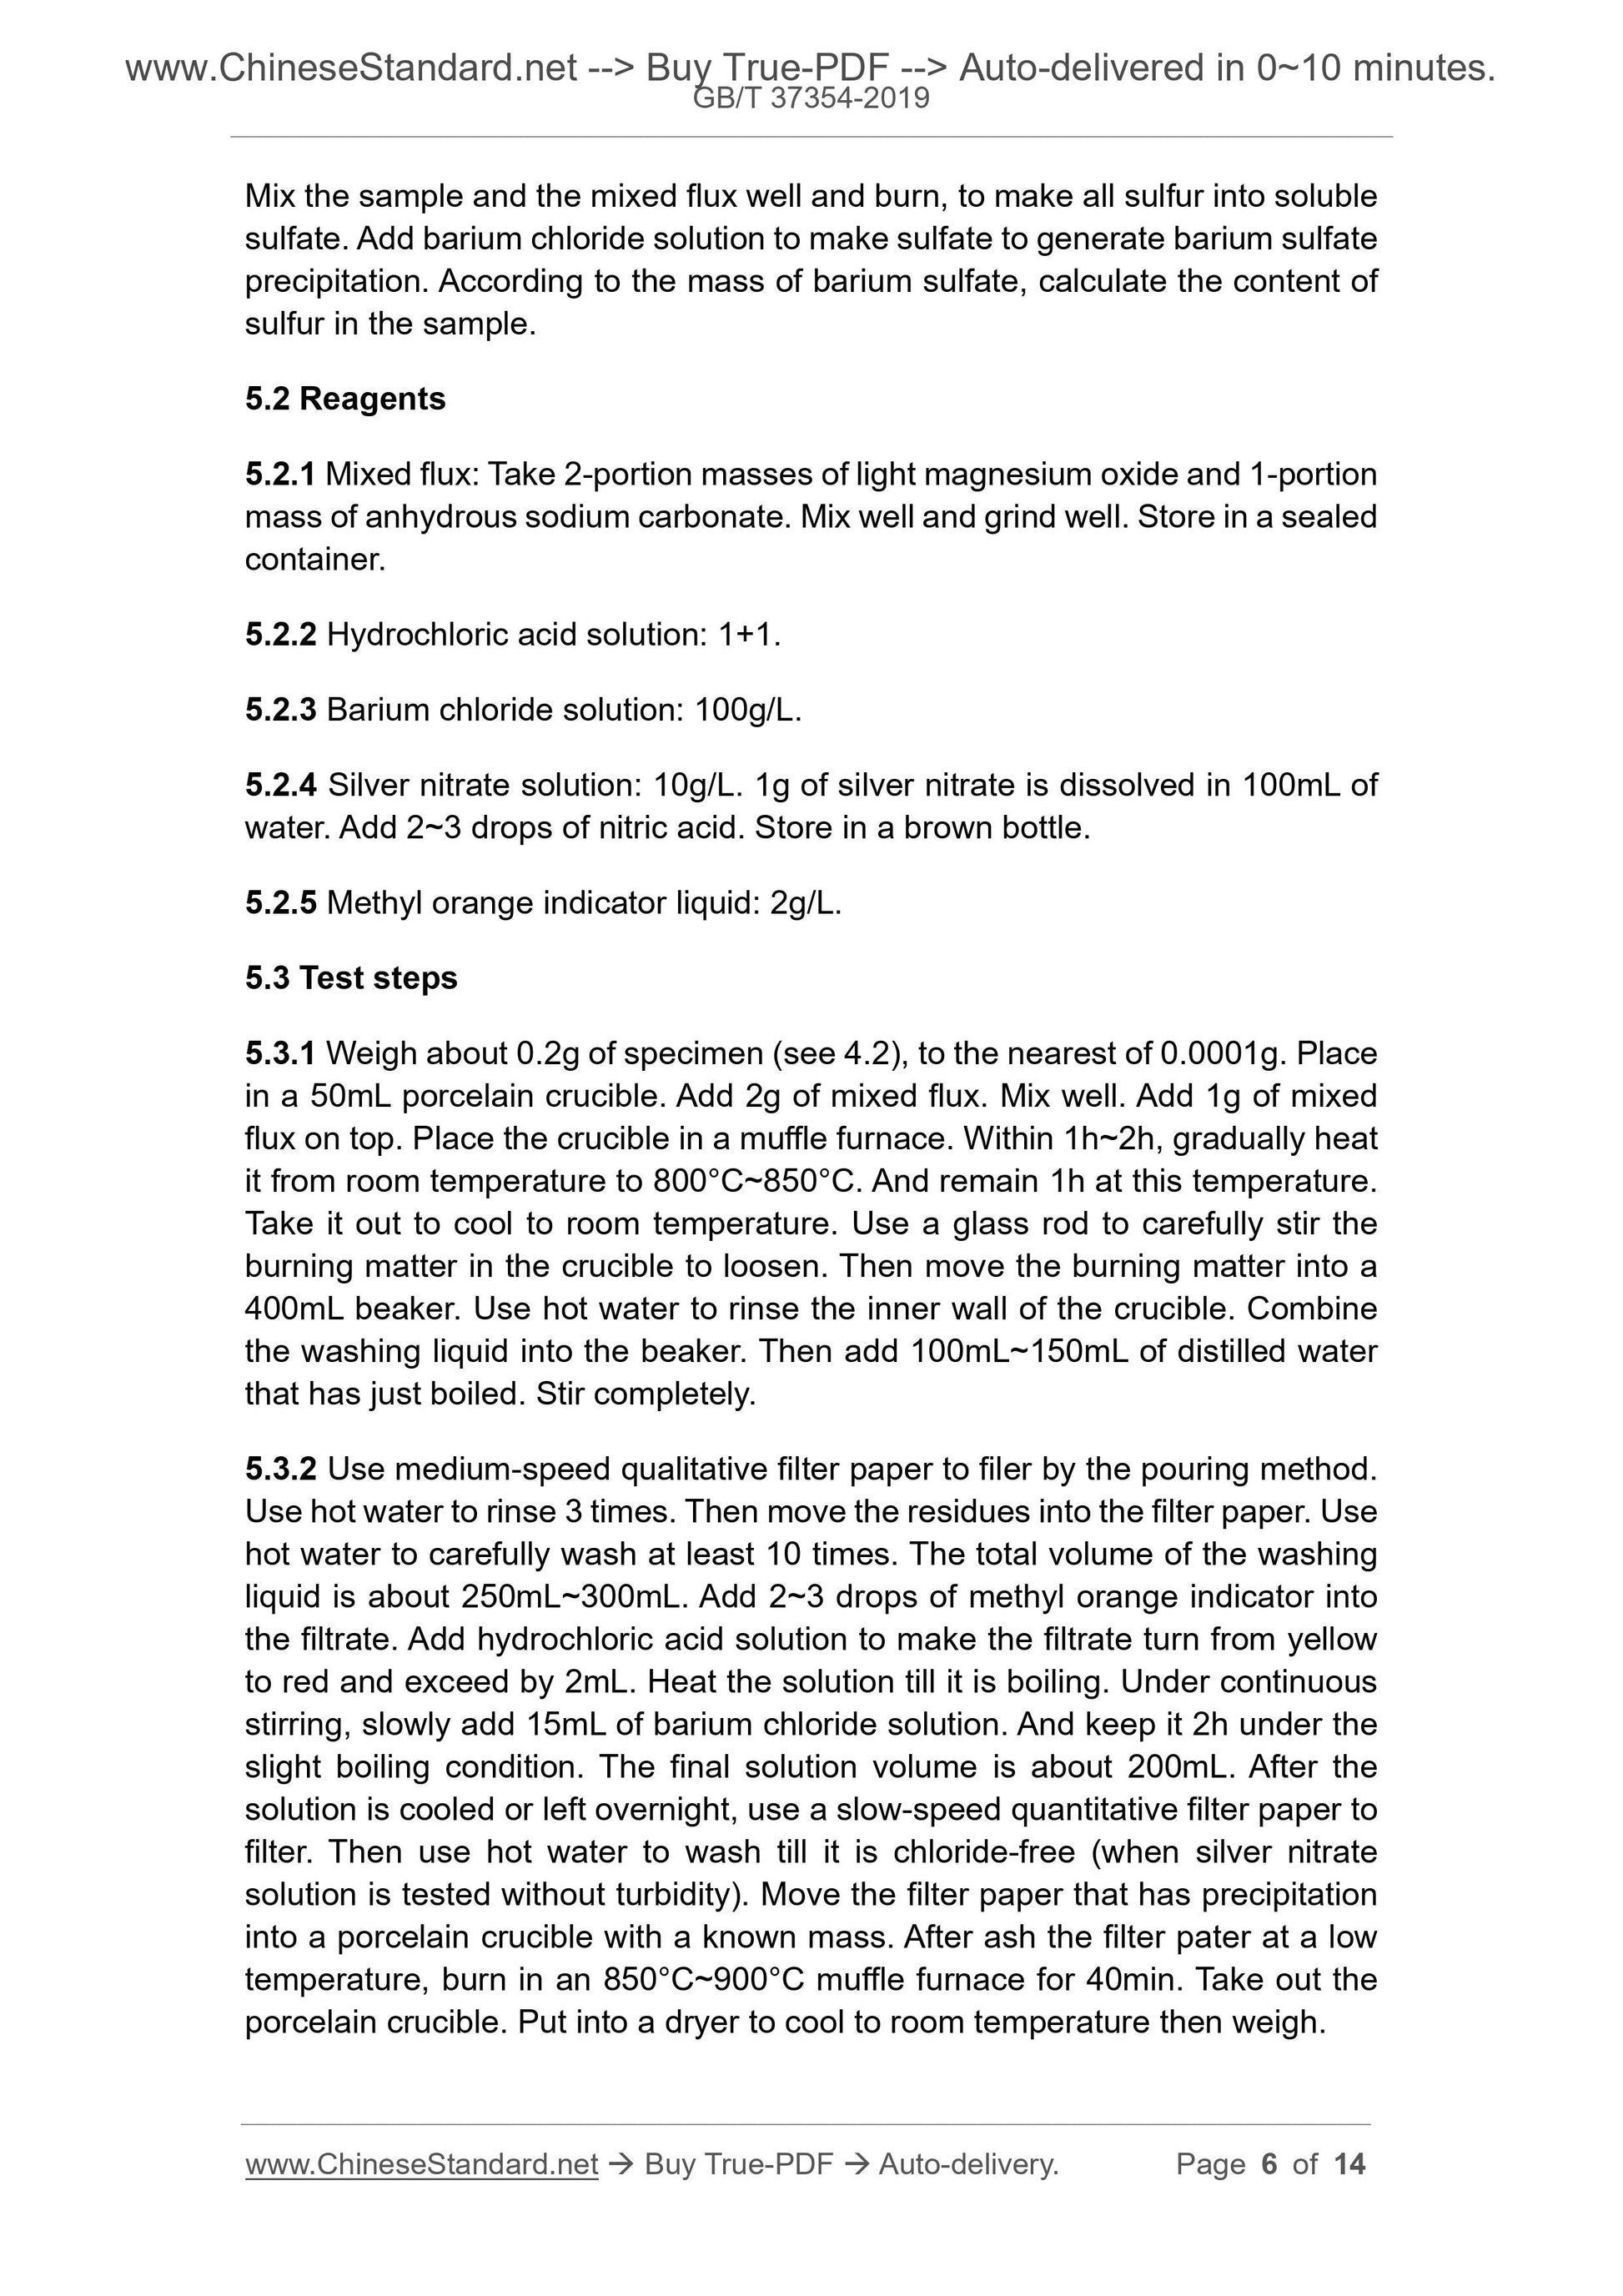 GB/T 37354-2019 Page 4